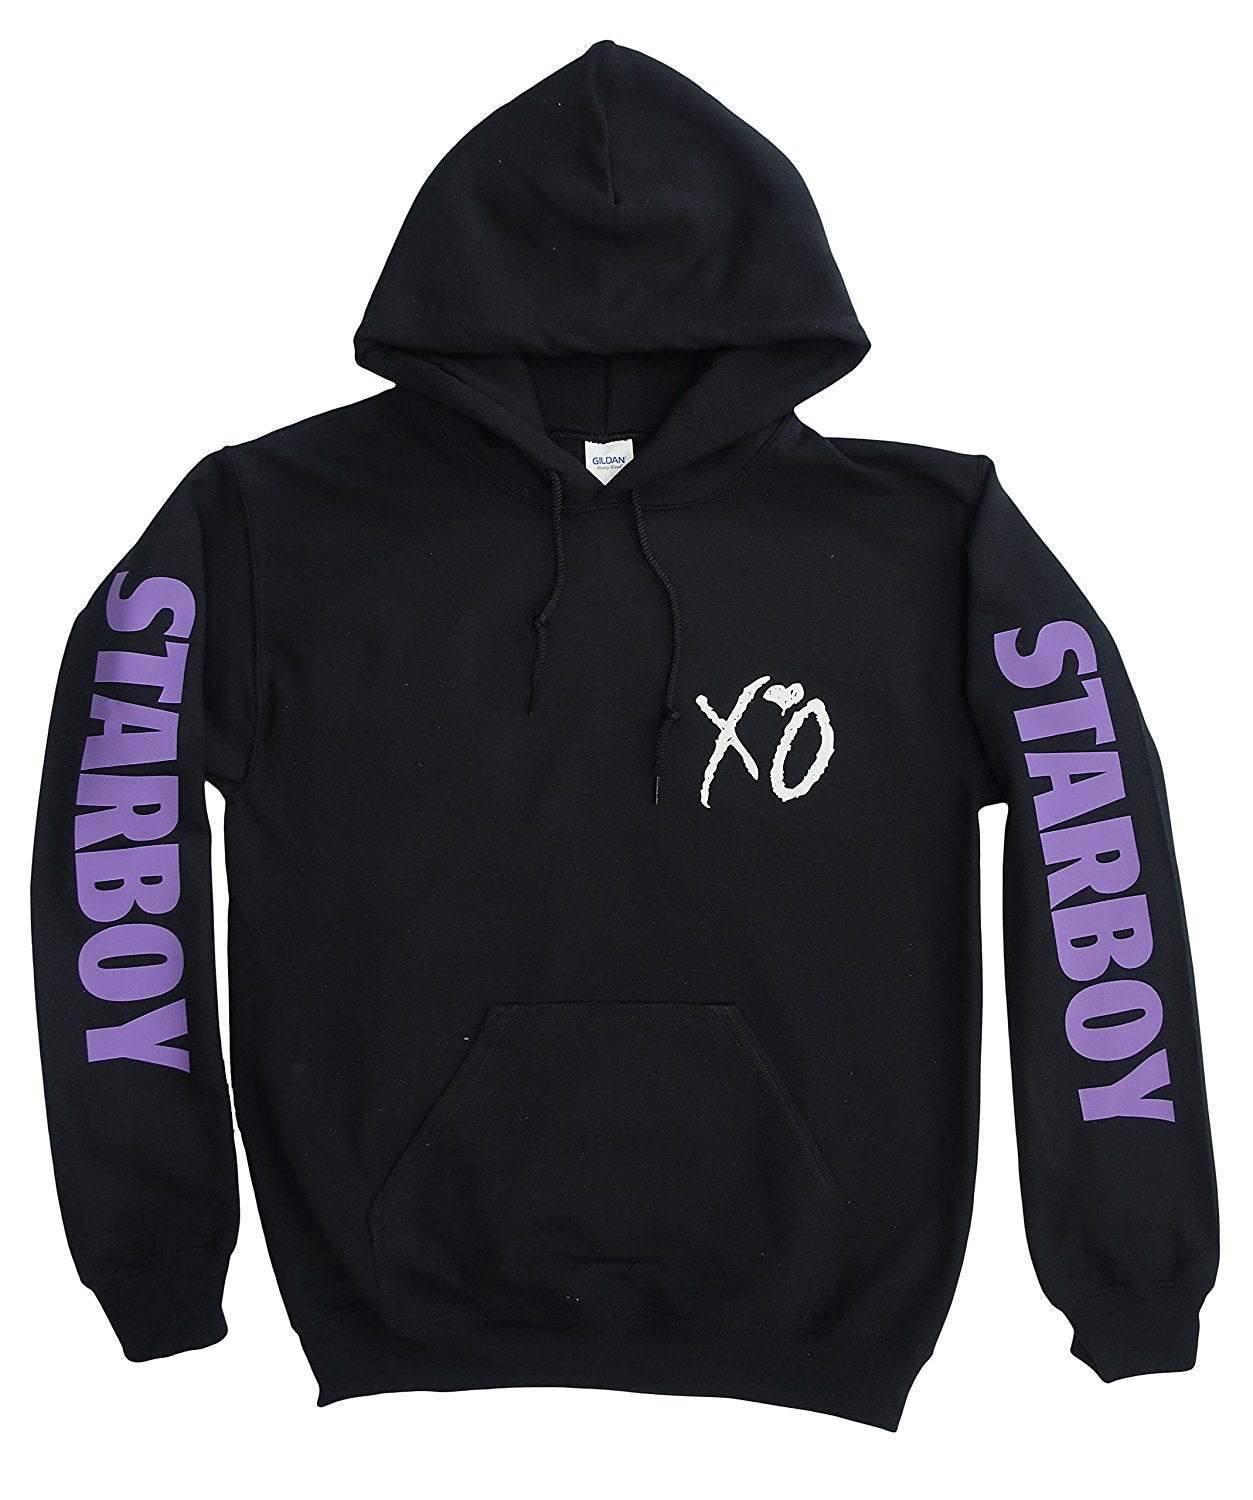 The Weeknd Starboy XO Hoodie, Concert Merch, Tour Clothing, (White